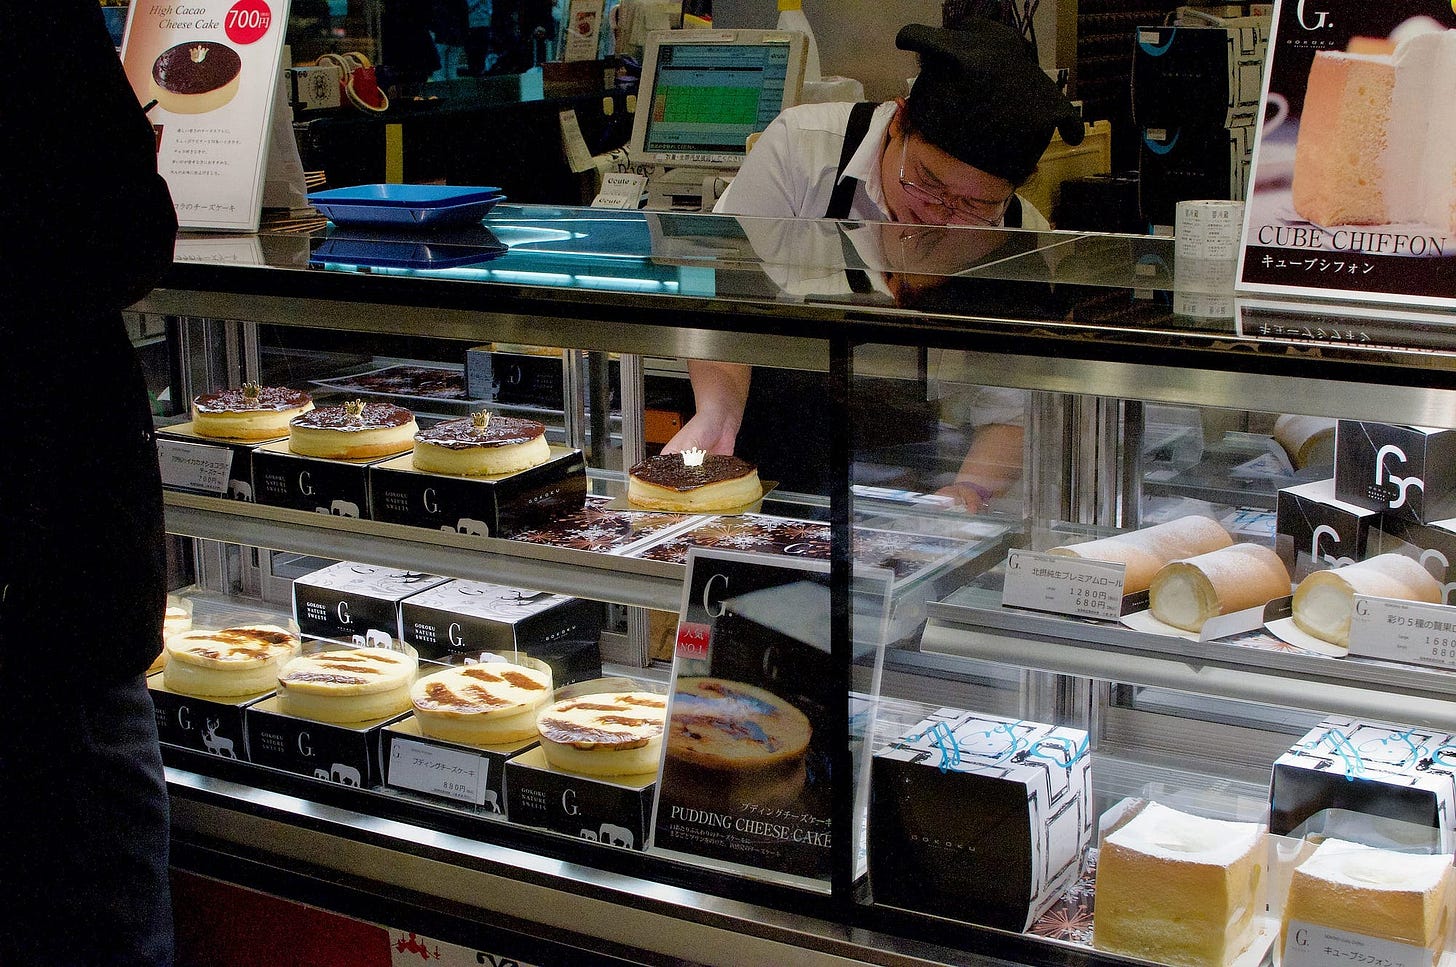 Person removing a pudding cheesecake from display case, photo by Juan Aguilera.